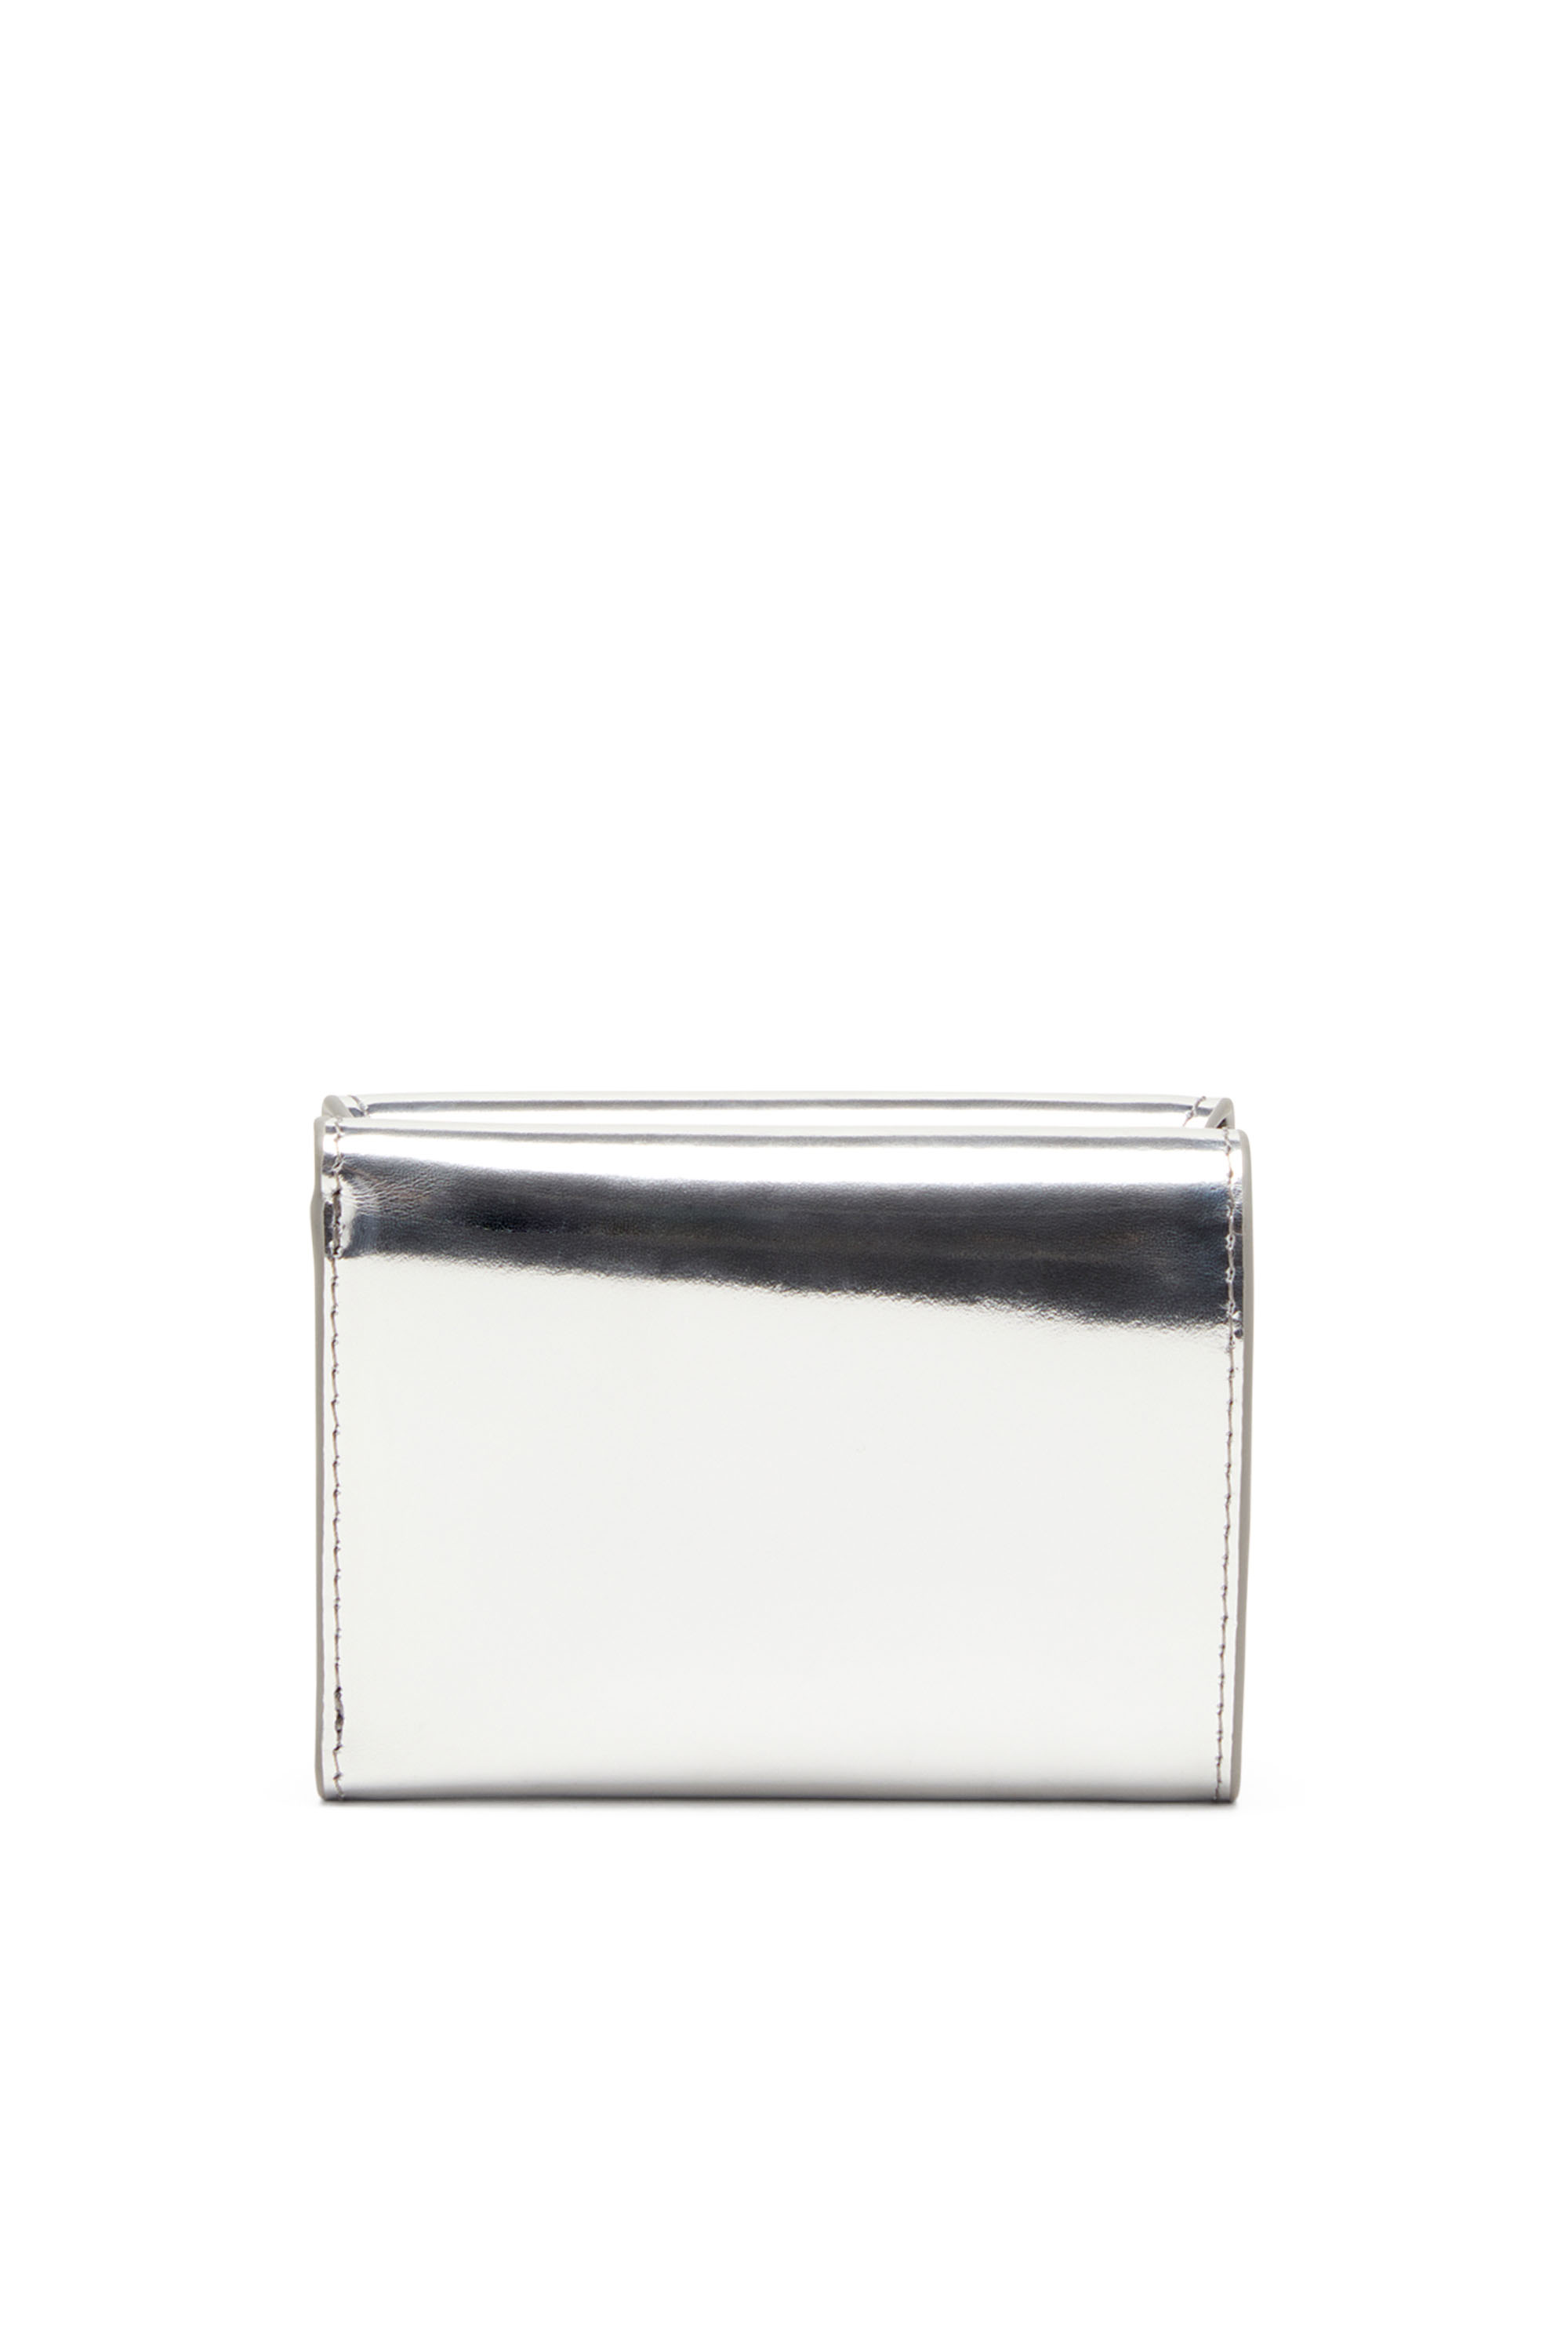 Diesel - 1DR TRI FOLD COIN XS II, Woman Tri-fold wallet in mirrored leather in Silver - Image 2